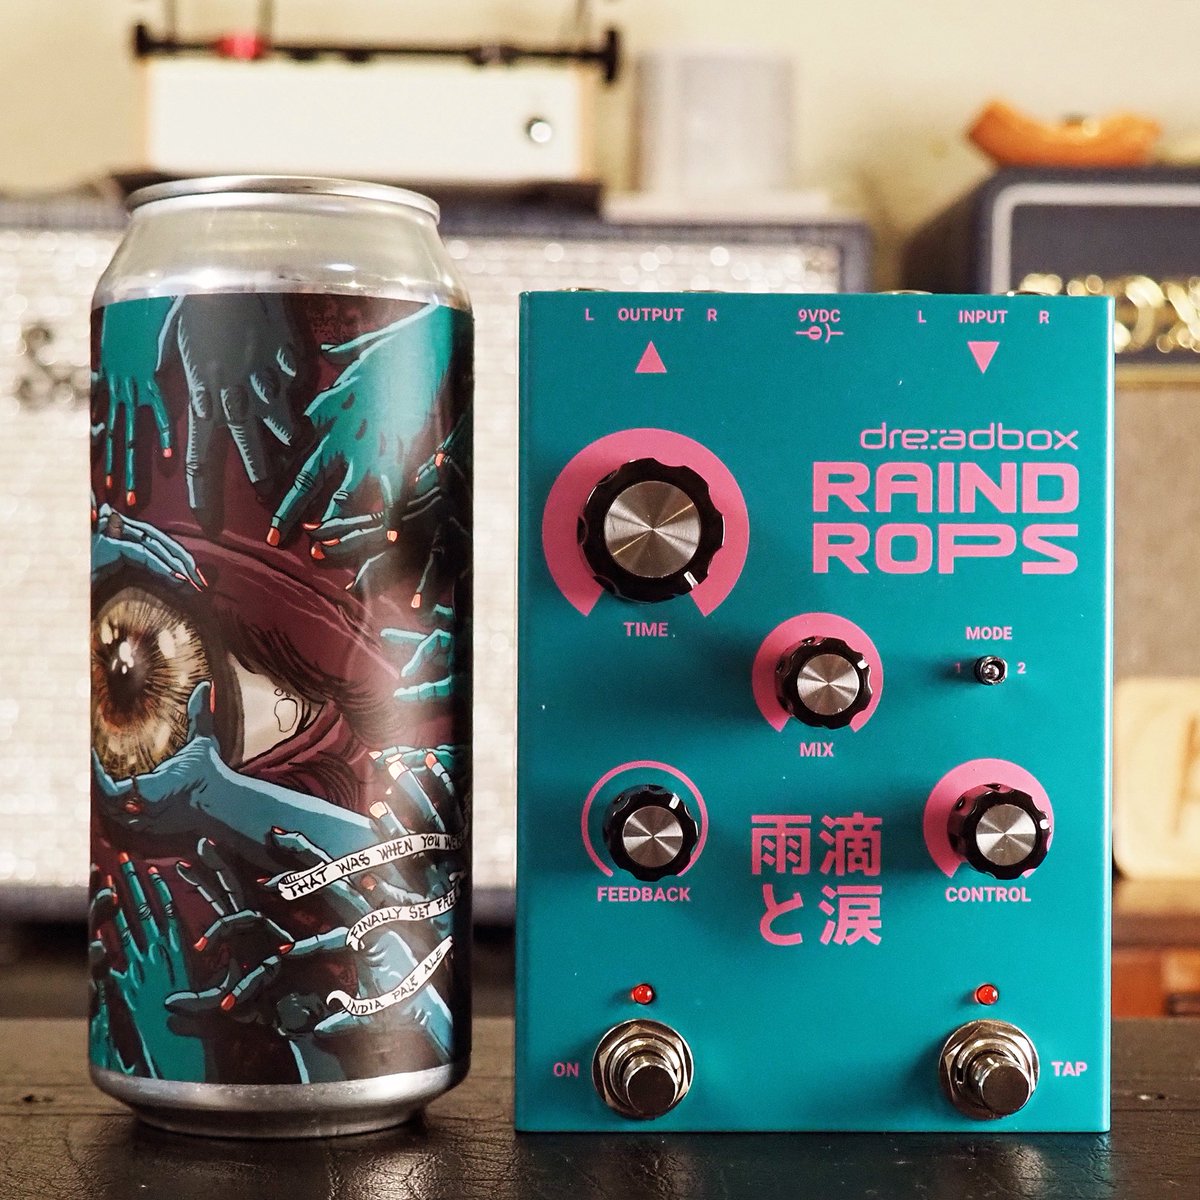 A @BurialBeer That Was When You Were Finally Set Free Hazy IPA paired with the Raindrops Stereo Delay/Pitch/Reverb from @DreadboxFx🍺🎛
.
#beer #pedals #beerandpedals #pedalsandeffects #pedaloftheday #effectspedals #ilovebeer #dreadbox #raindrops #burialbeer #IPA